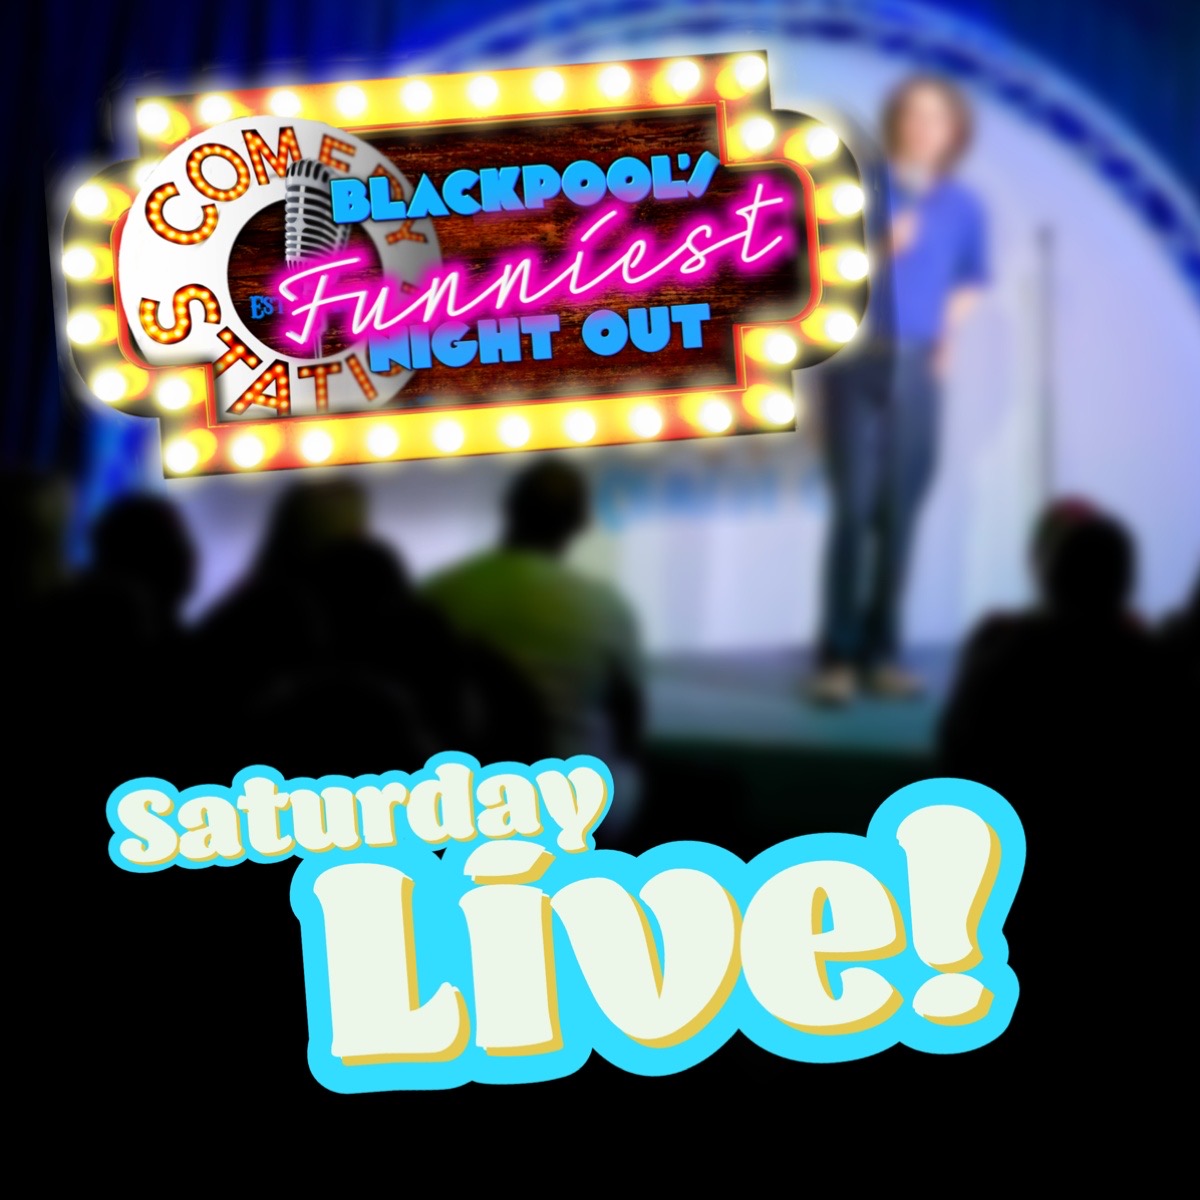 Saturday Live! Stand-up comedy in Blackpool